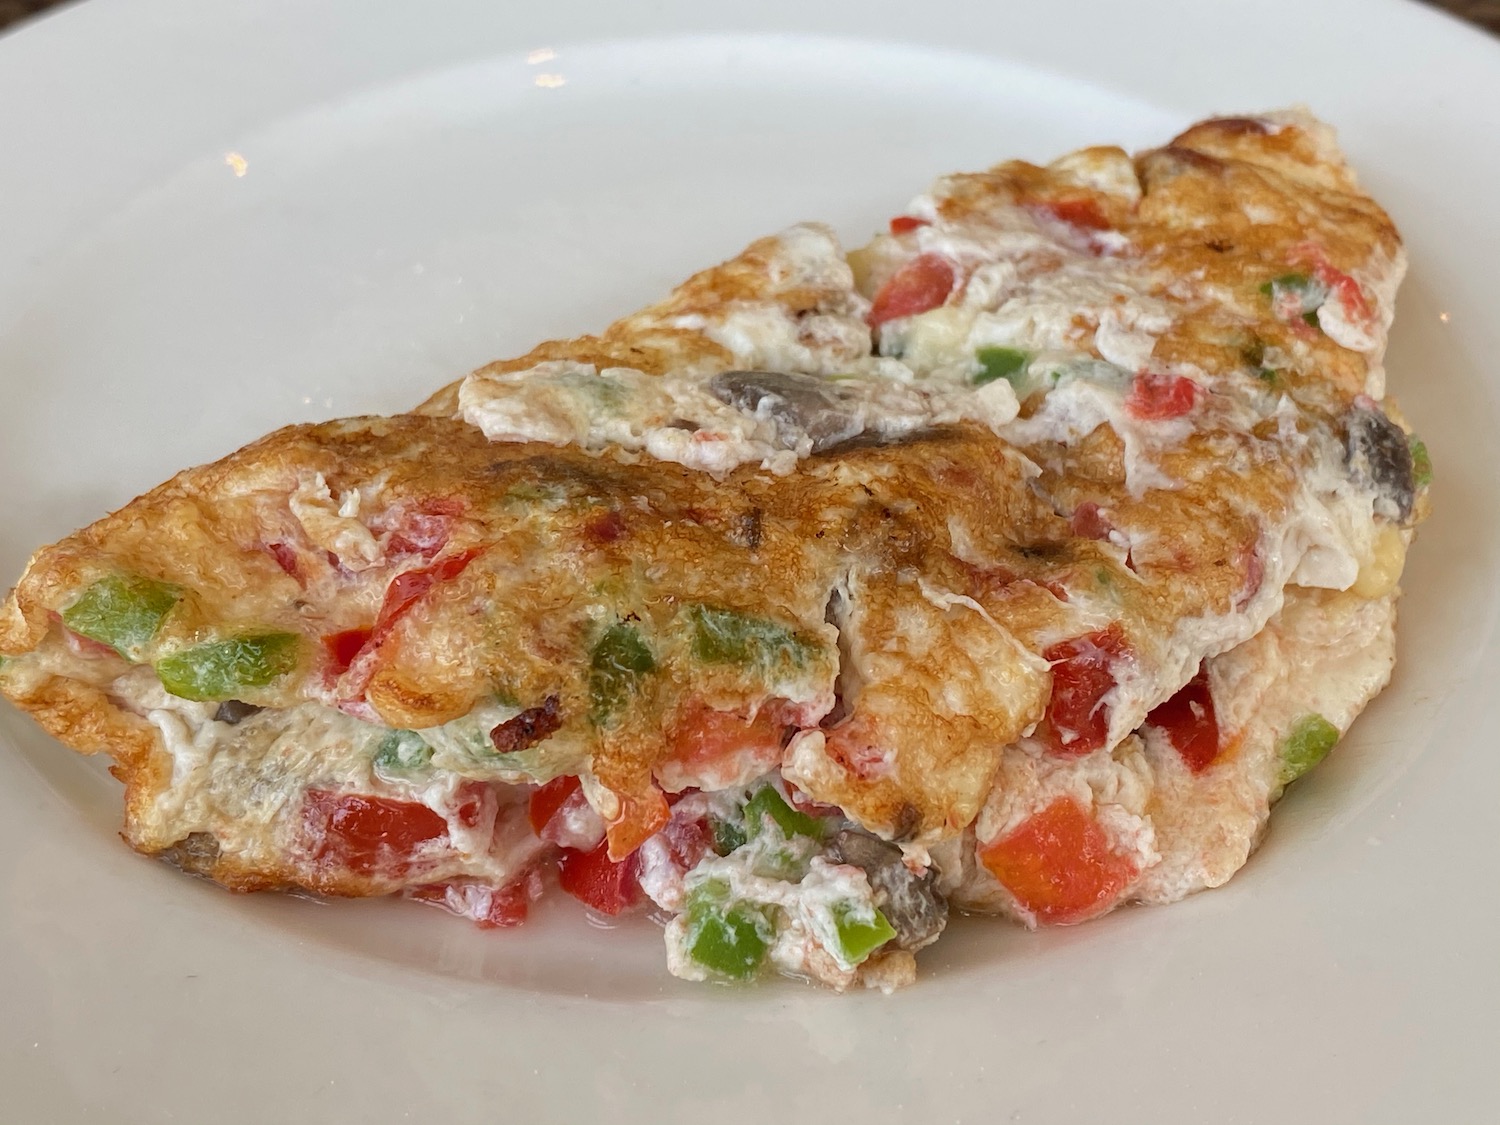 a plate of omelette with vegetables